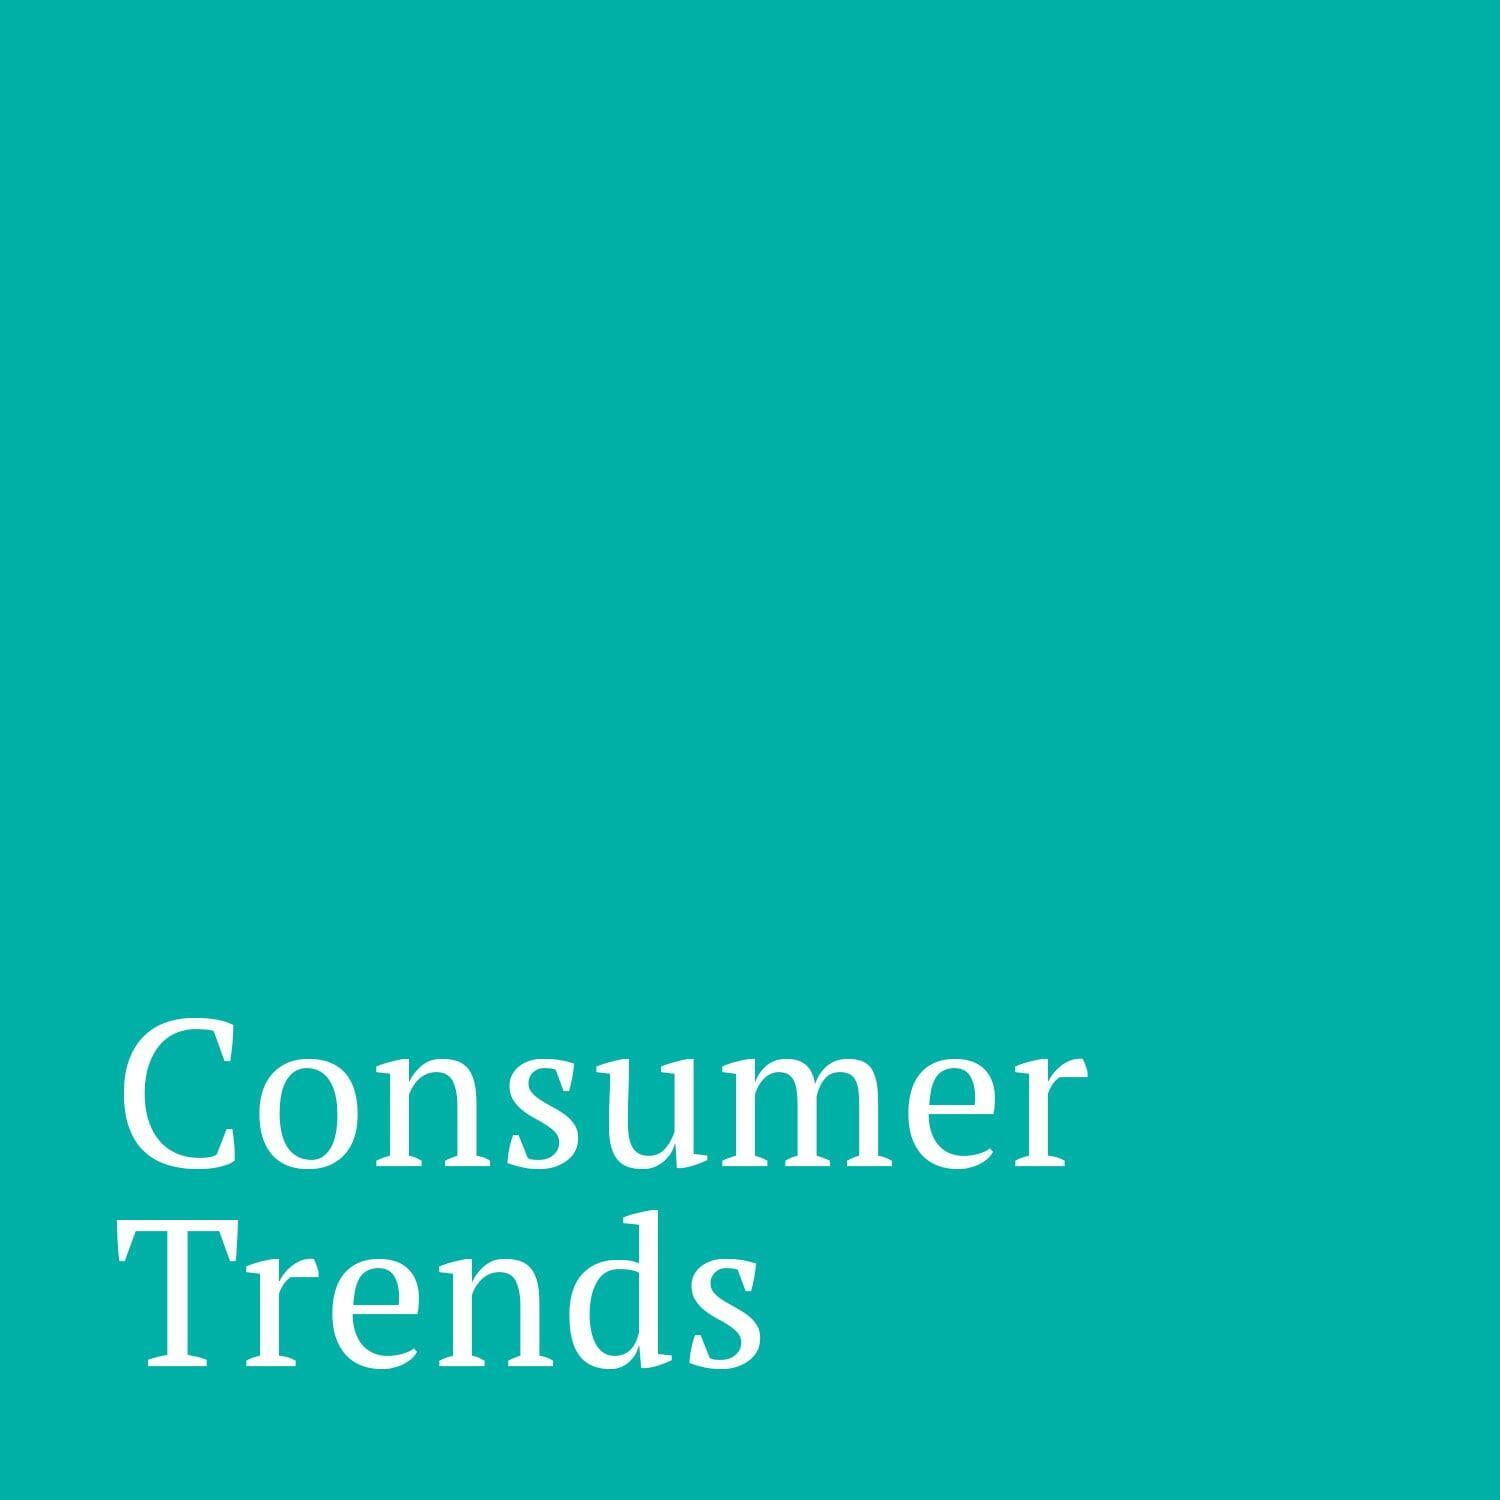 Consumer and Audience Trends Blog Post Category | The Niche by The DRAW Agency